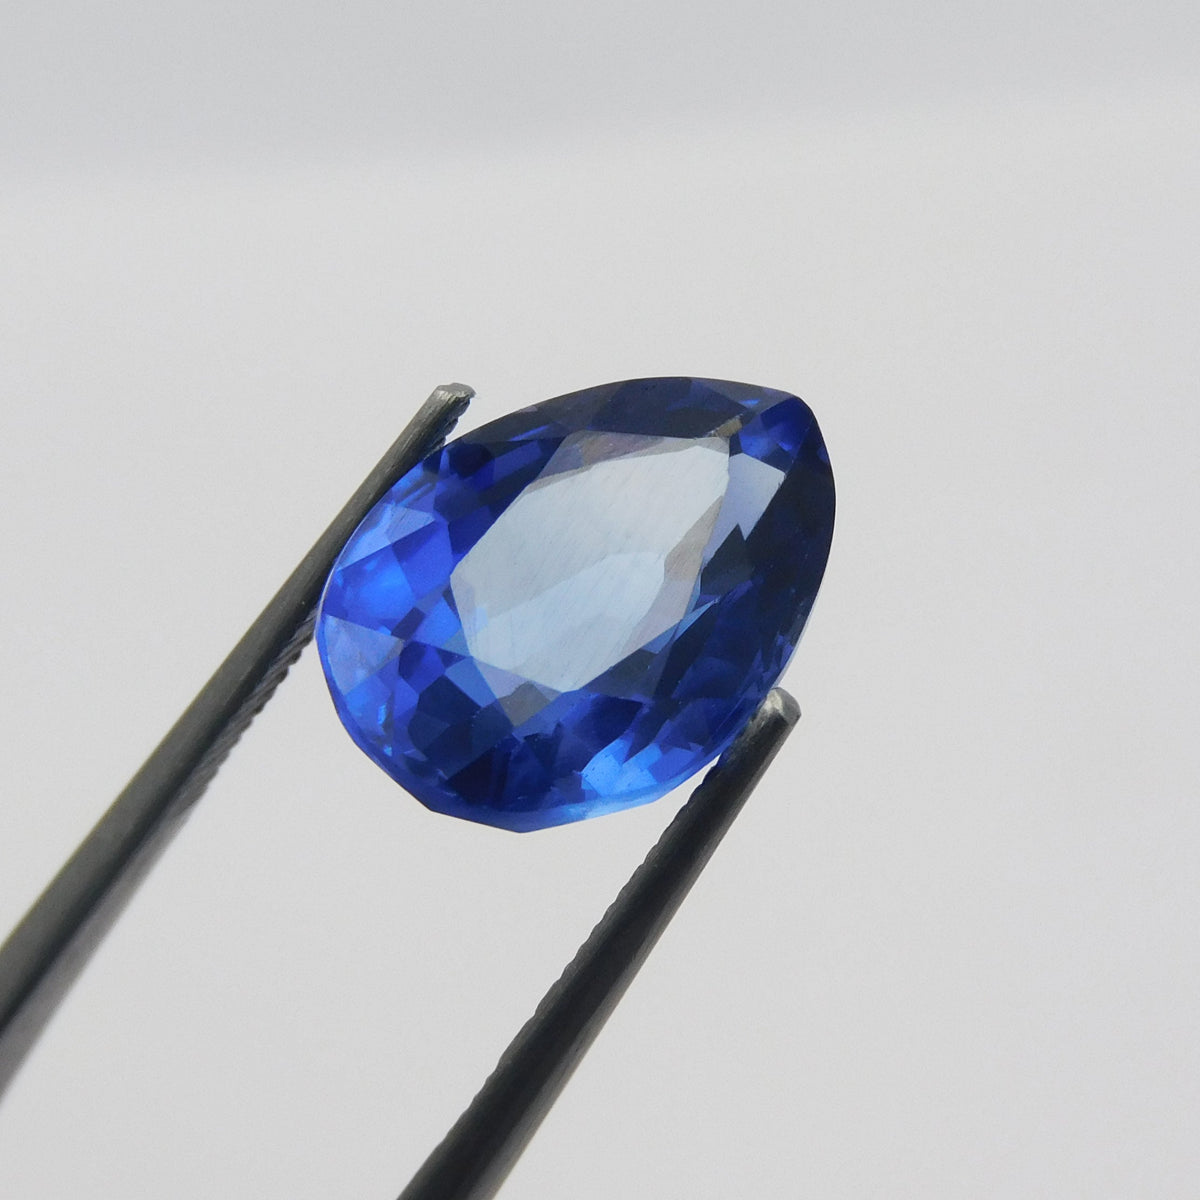 "DECEMBER " Birth Month Gemstone , 8.25 Carat Pear Cut Blue Dark Tanzanite Certified Natural Loose Gemstone |Free Gift Free Delivery | Gift For Wife/ Sister